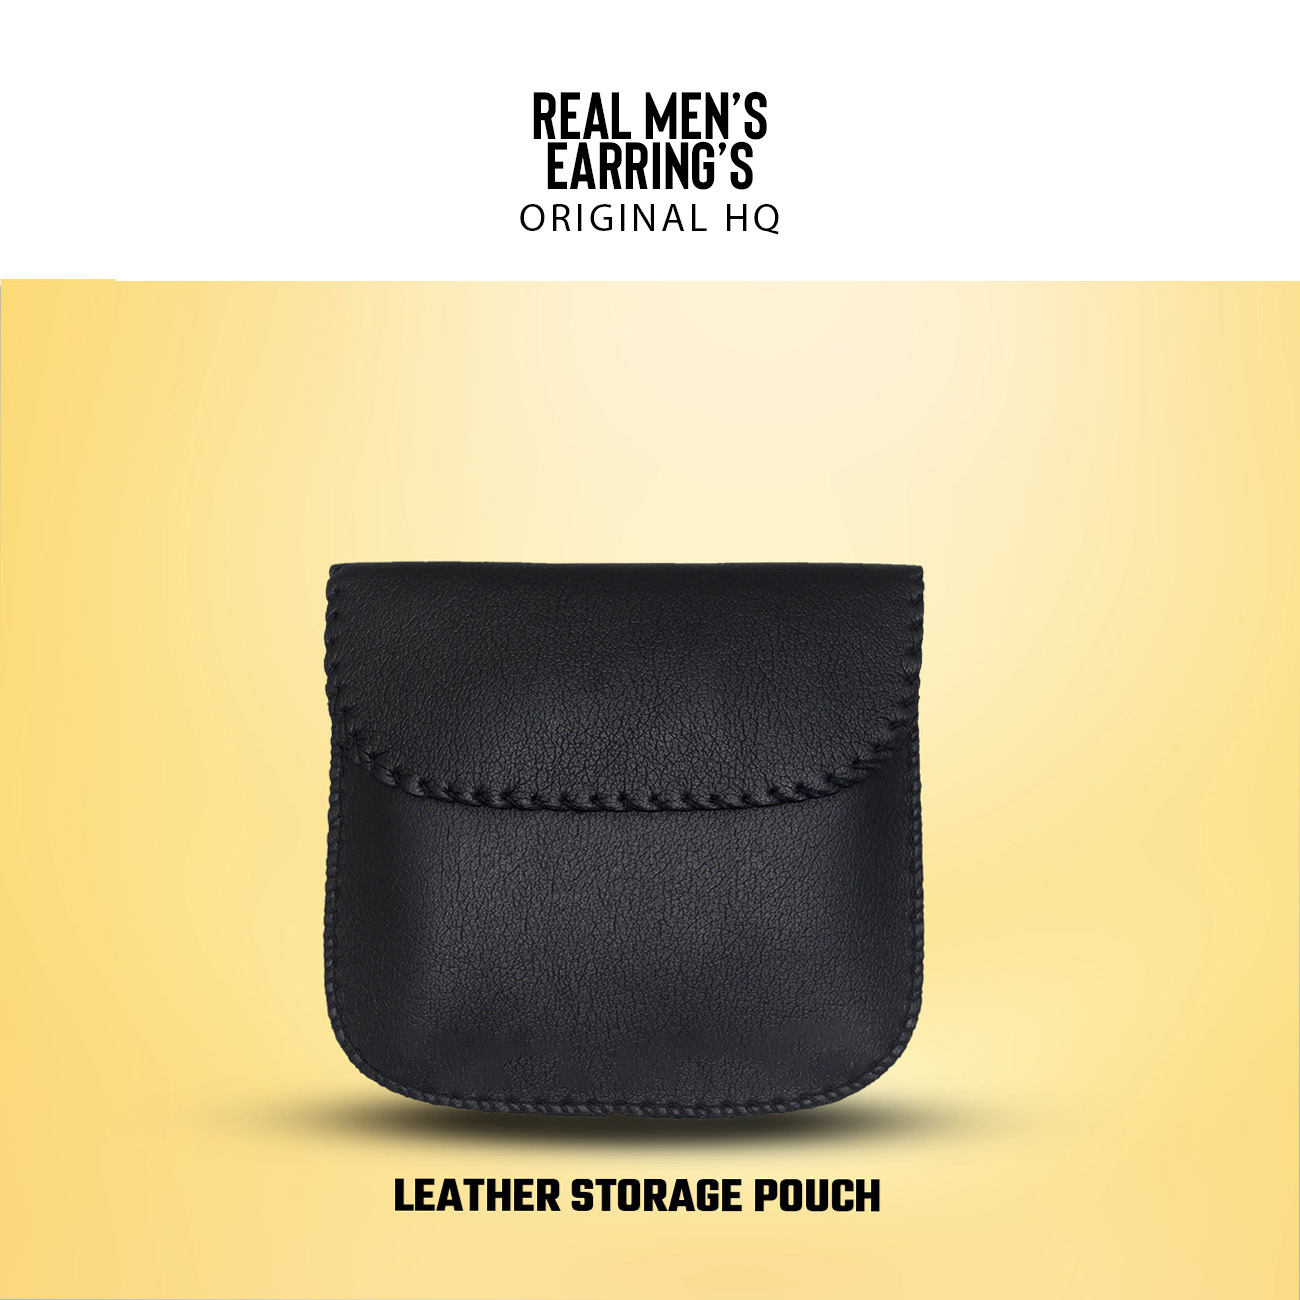 POUCH